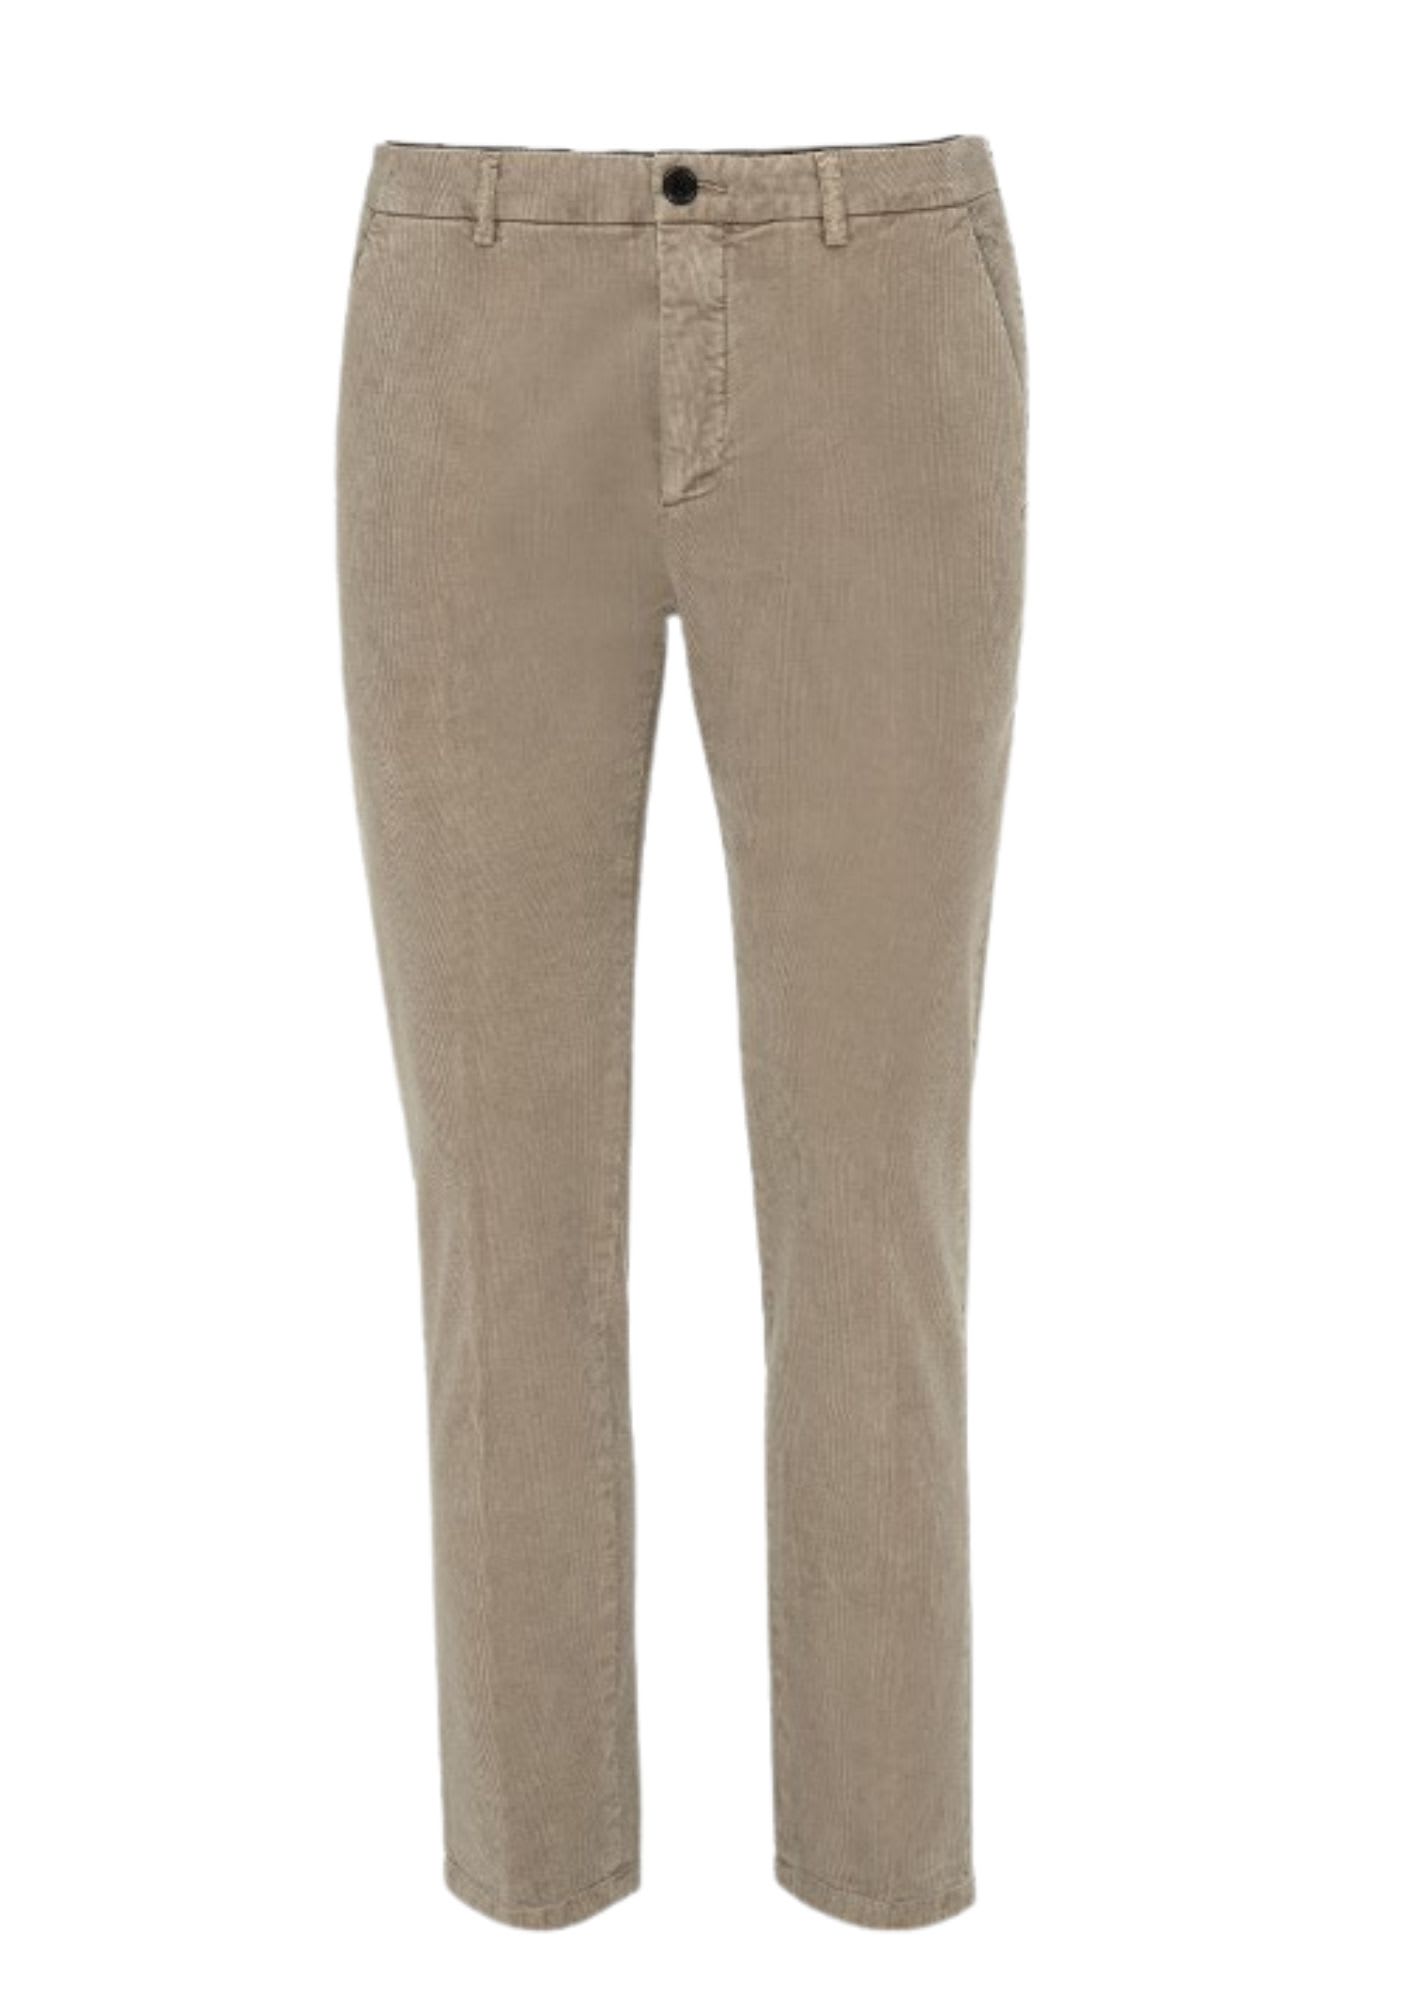 Department Five Prince Pences Chinos In Taupe